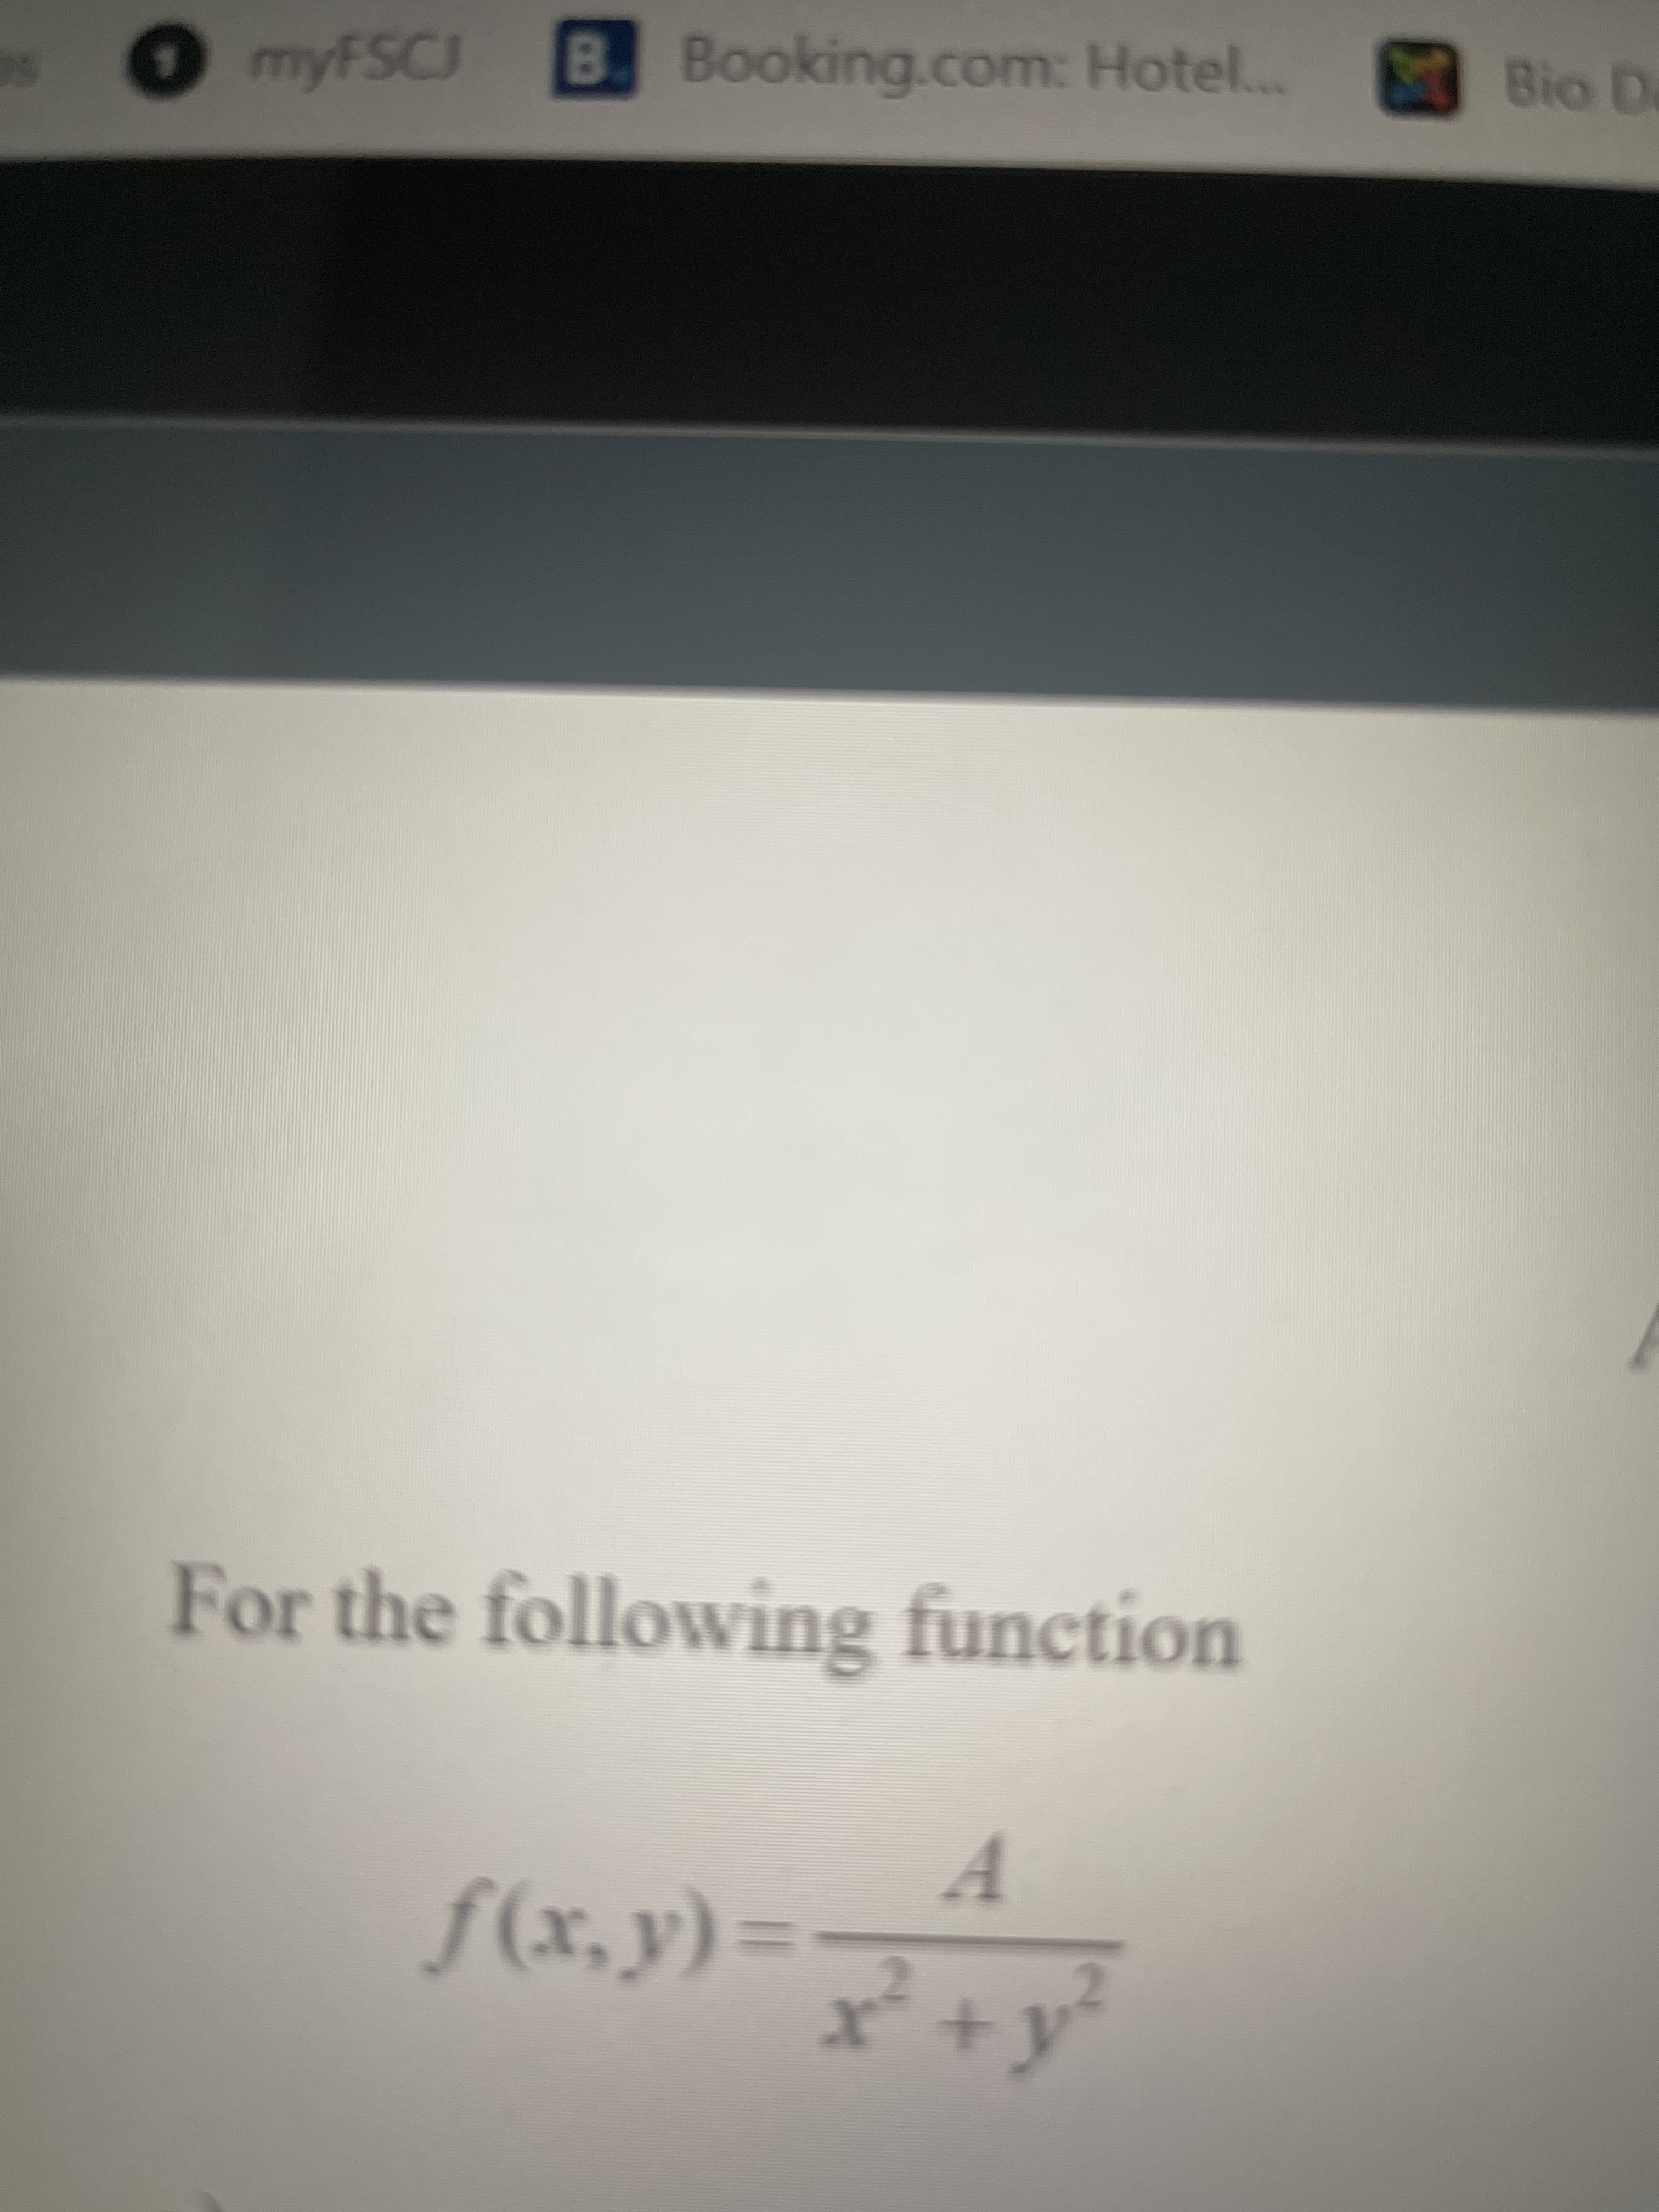 For the following function
f(x,y)=
x² +y°
